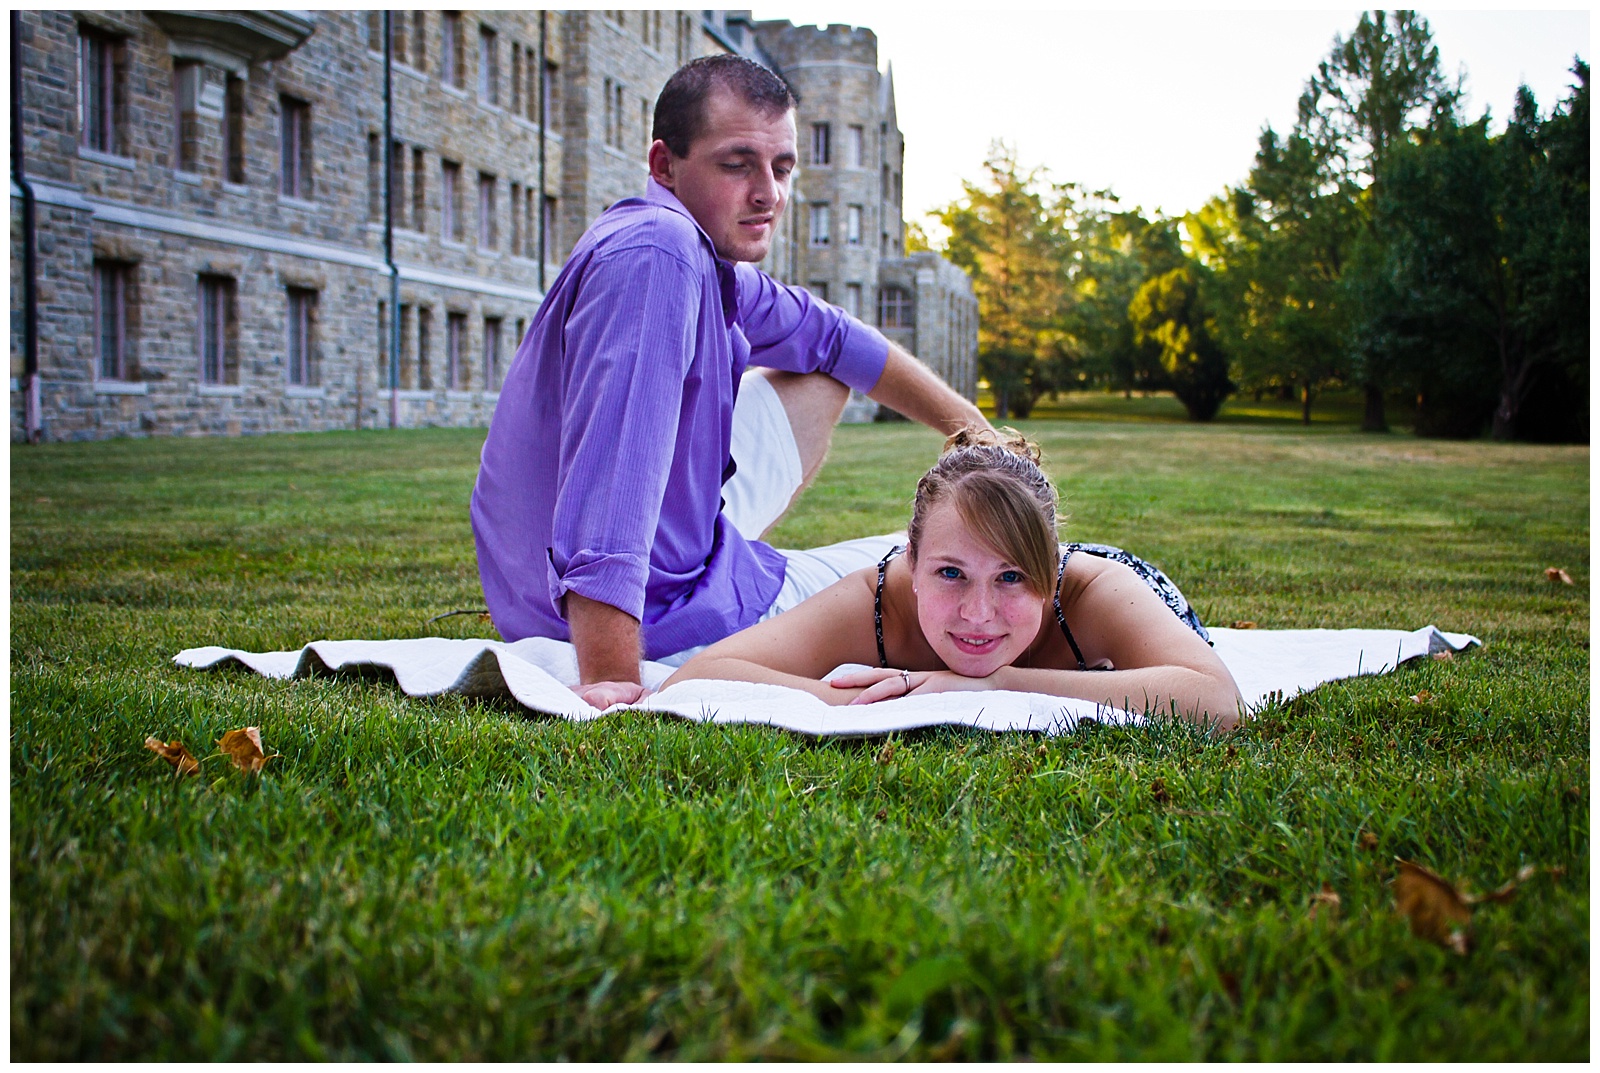 An engagement session in Atchison, Kansas.